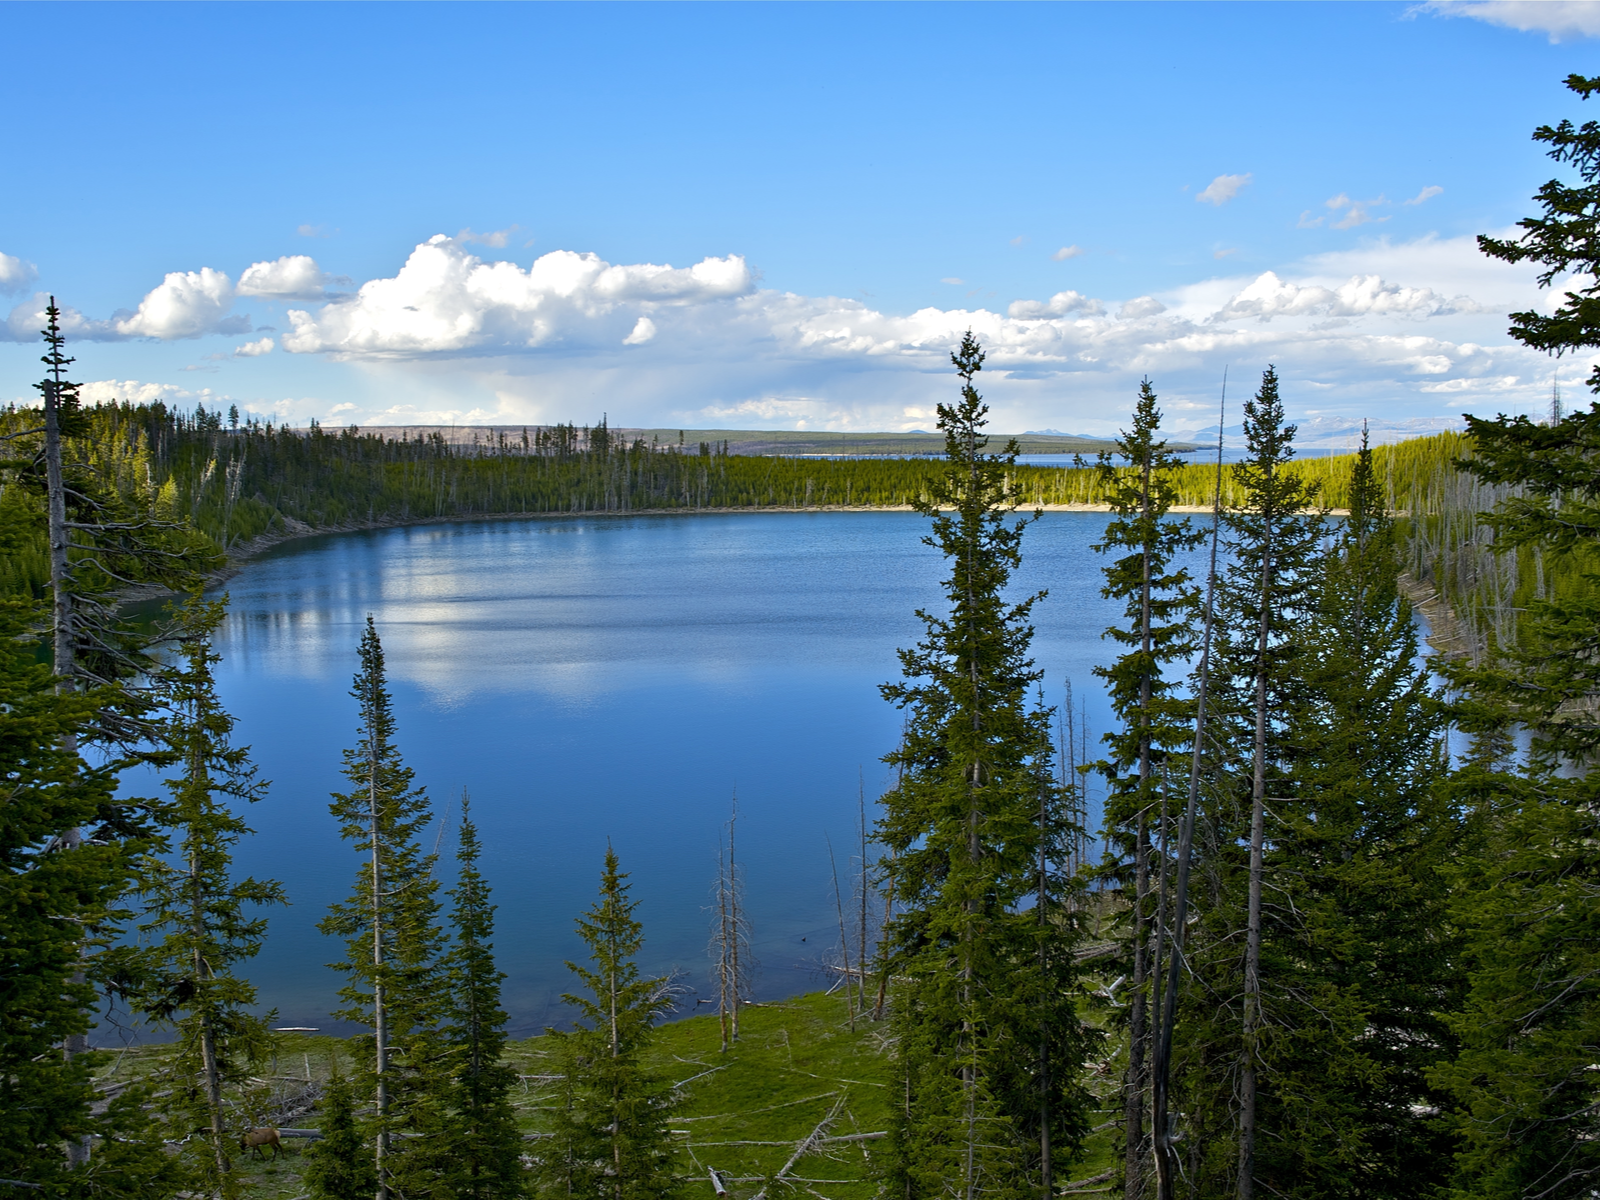 The vast area of Yellowstone Lake in Wyoming is one of the best lakes in the U.S., encircled by tall green Pine Trees